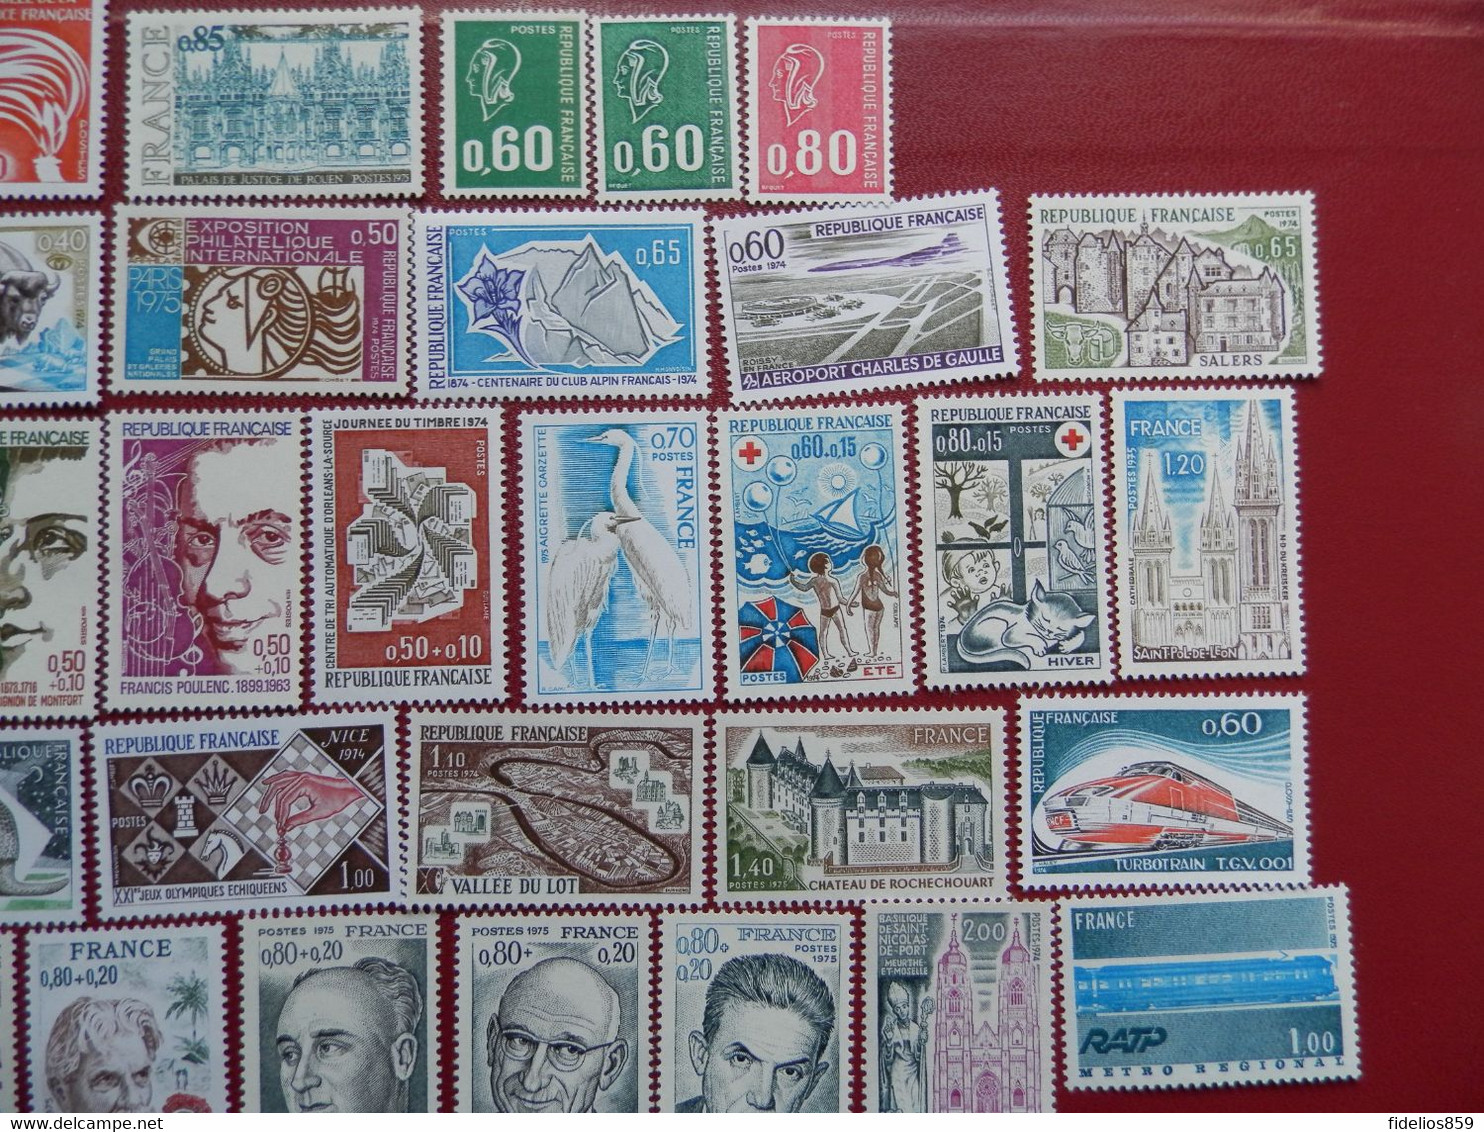 FRANCE ANNEE COMPLETE 1974 SOIT 47 TIMBRES NEUFS SANS CHARNIERE NI TRACE LUXE - 1970-1979